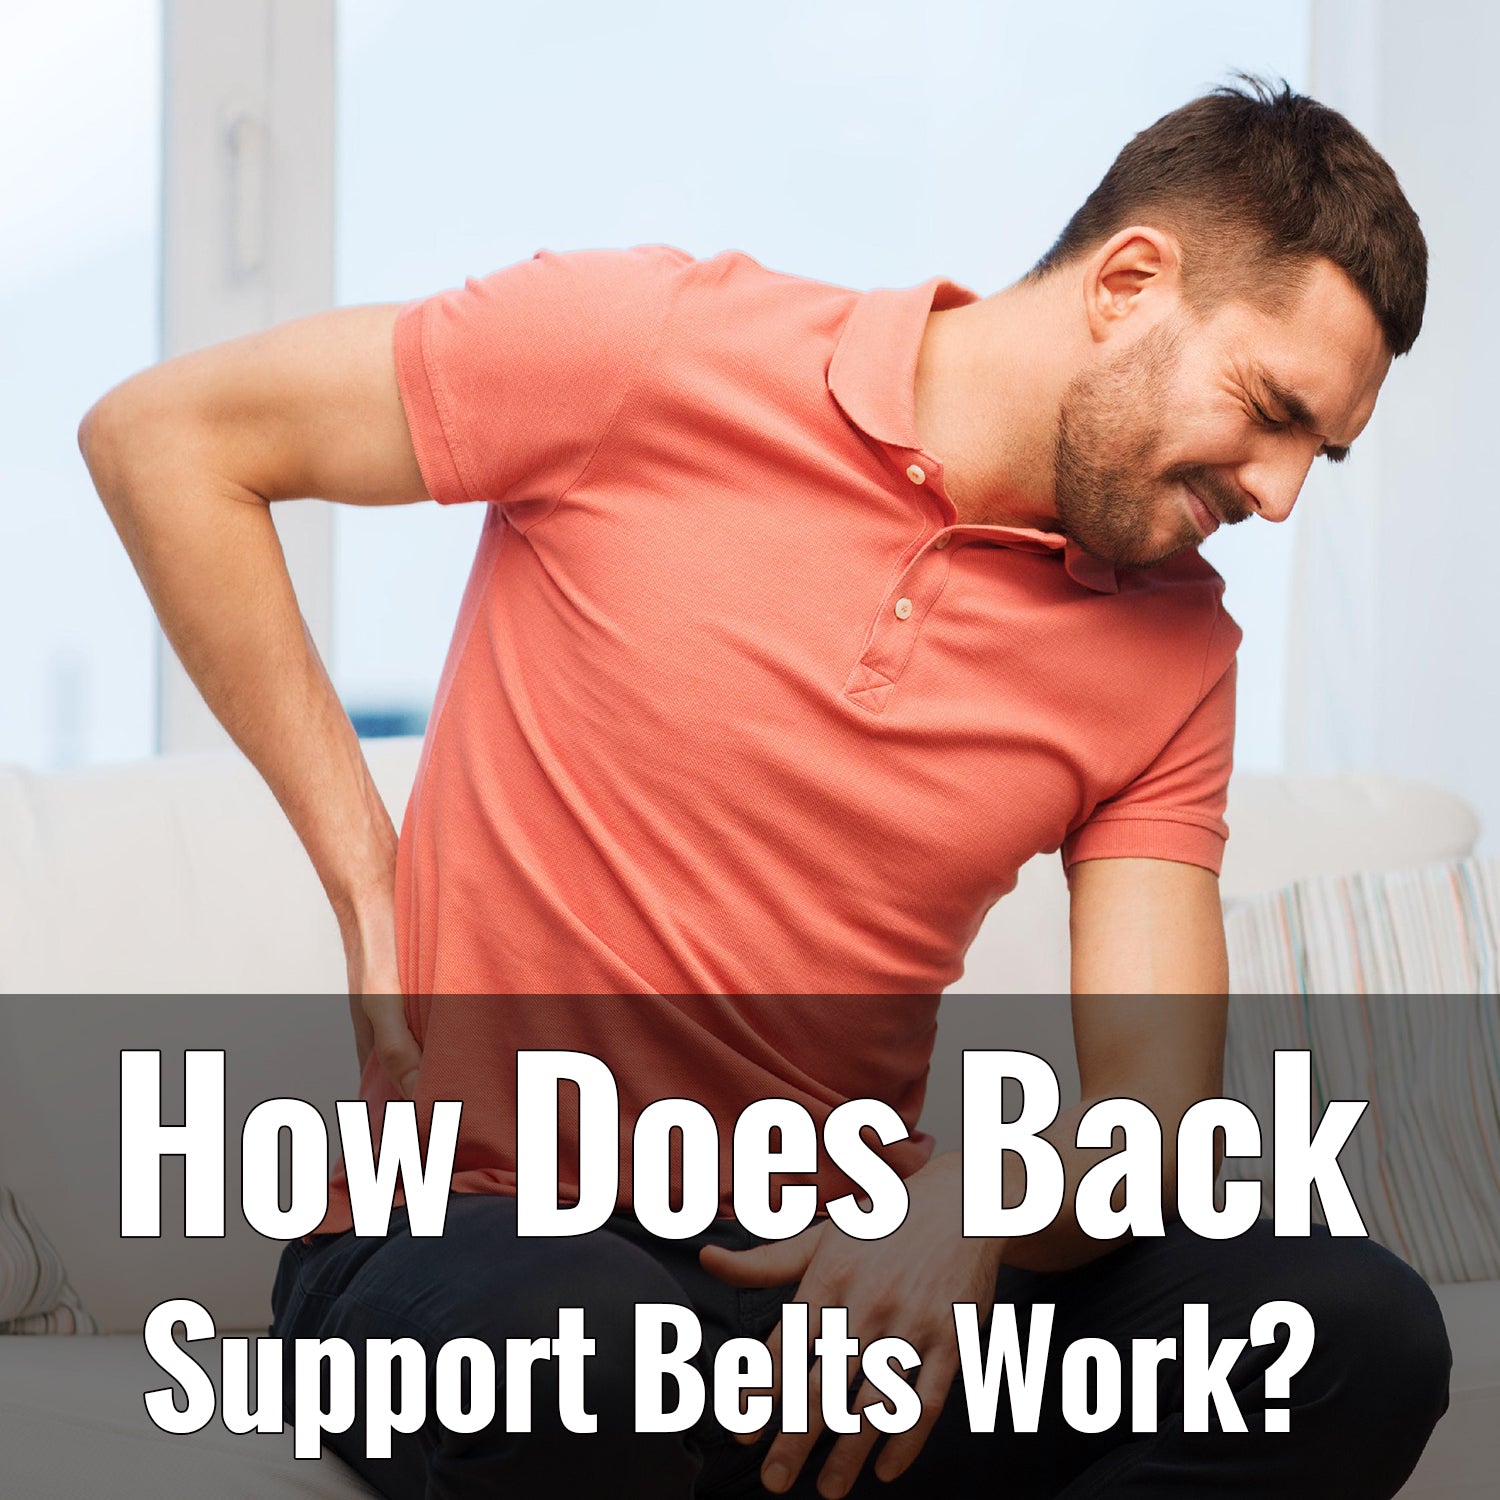 How Does Back Support Belts Work?